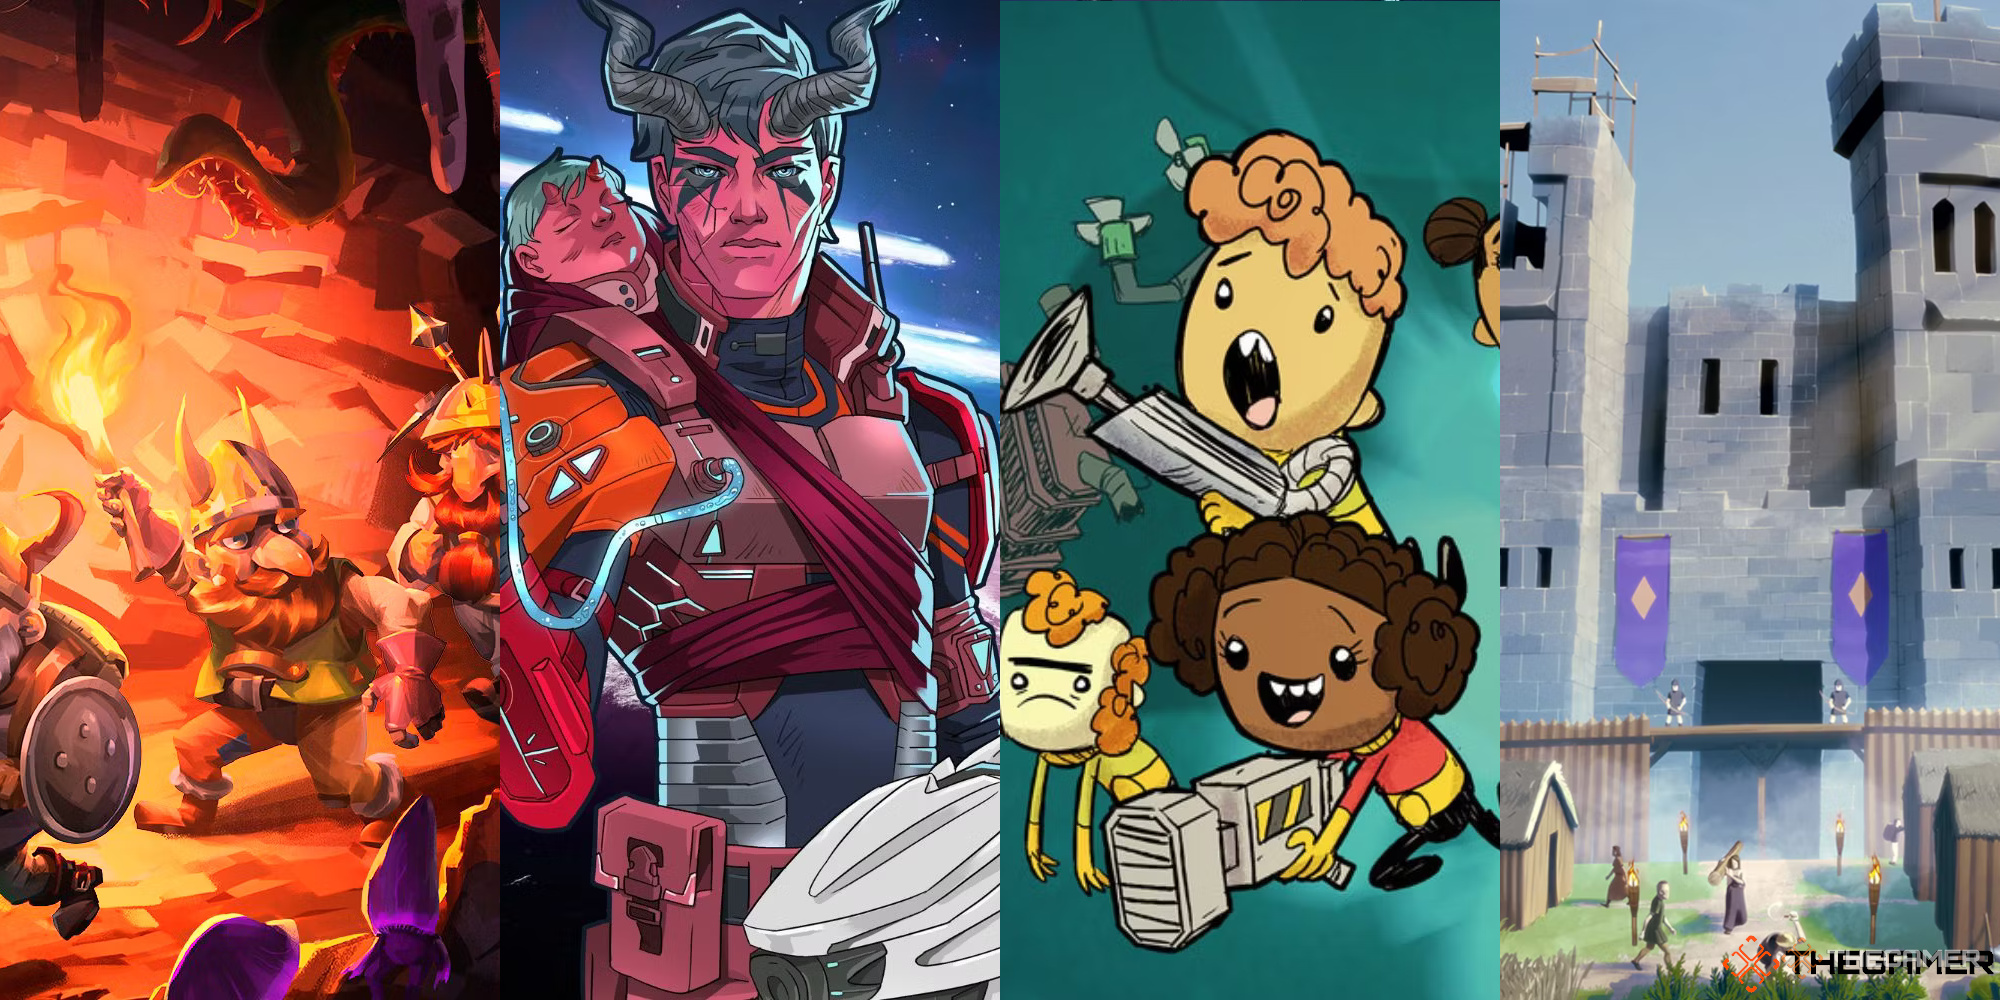 Four images featuring covers of Dwarf Fortress, Rimworld: BioTech, Oxygen Not Included, and Going Medieval